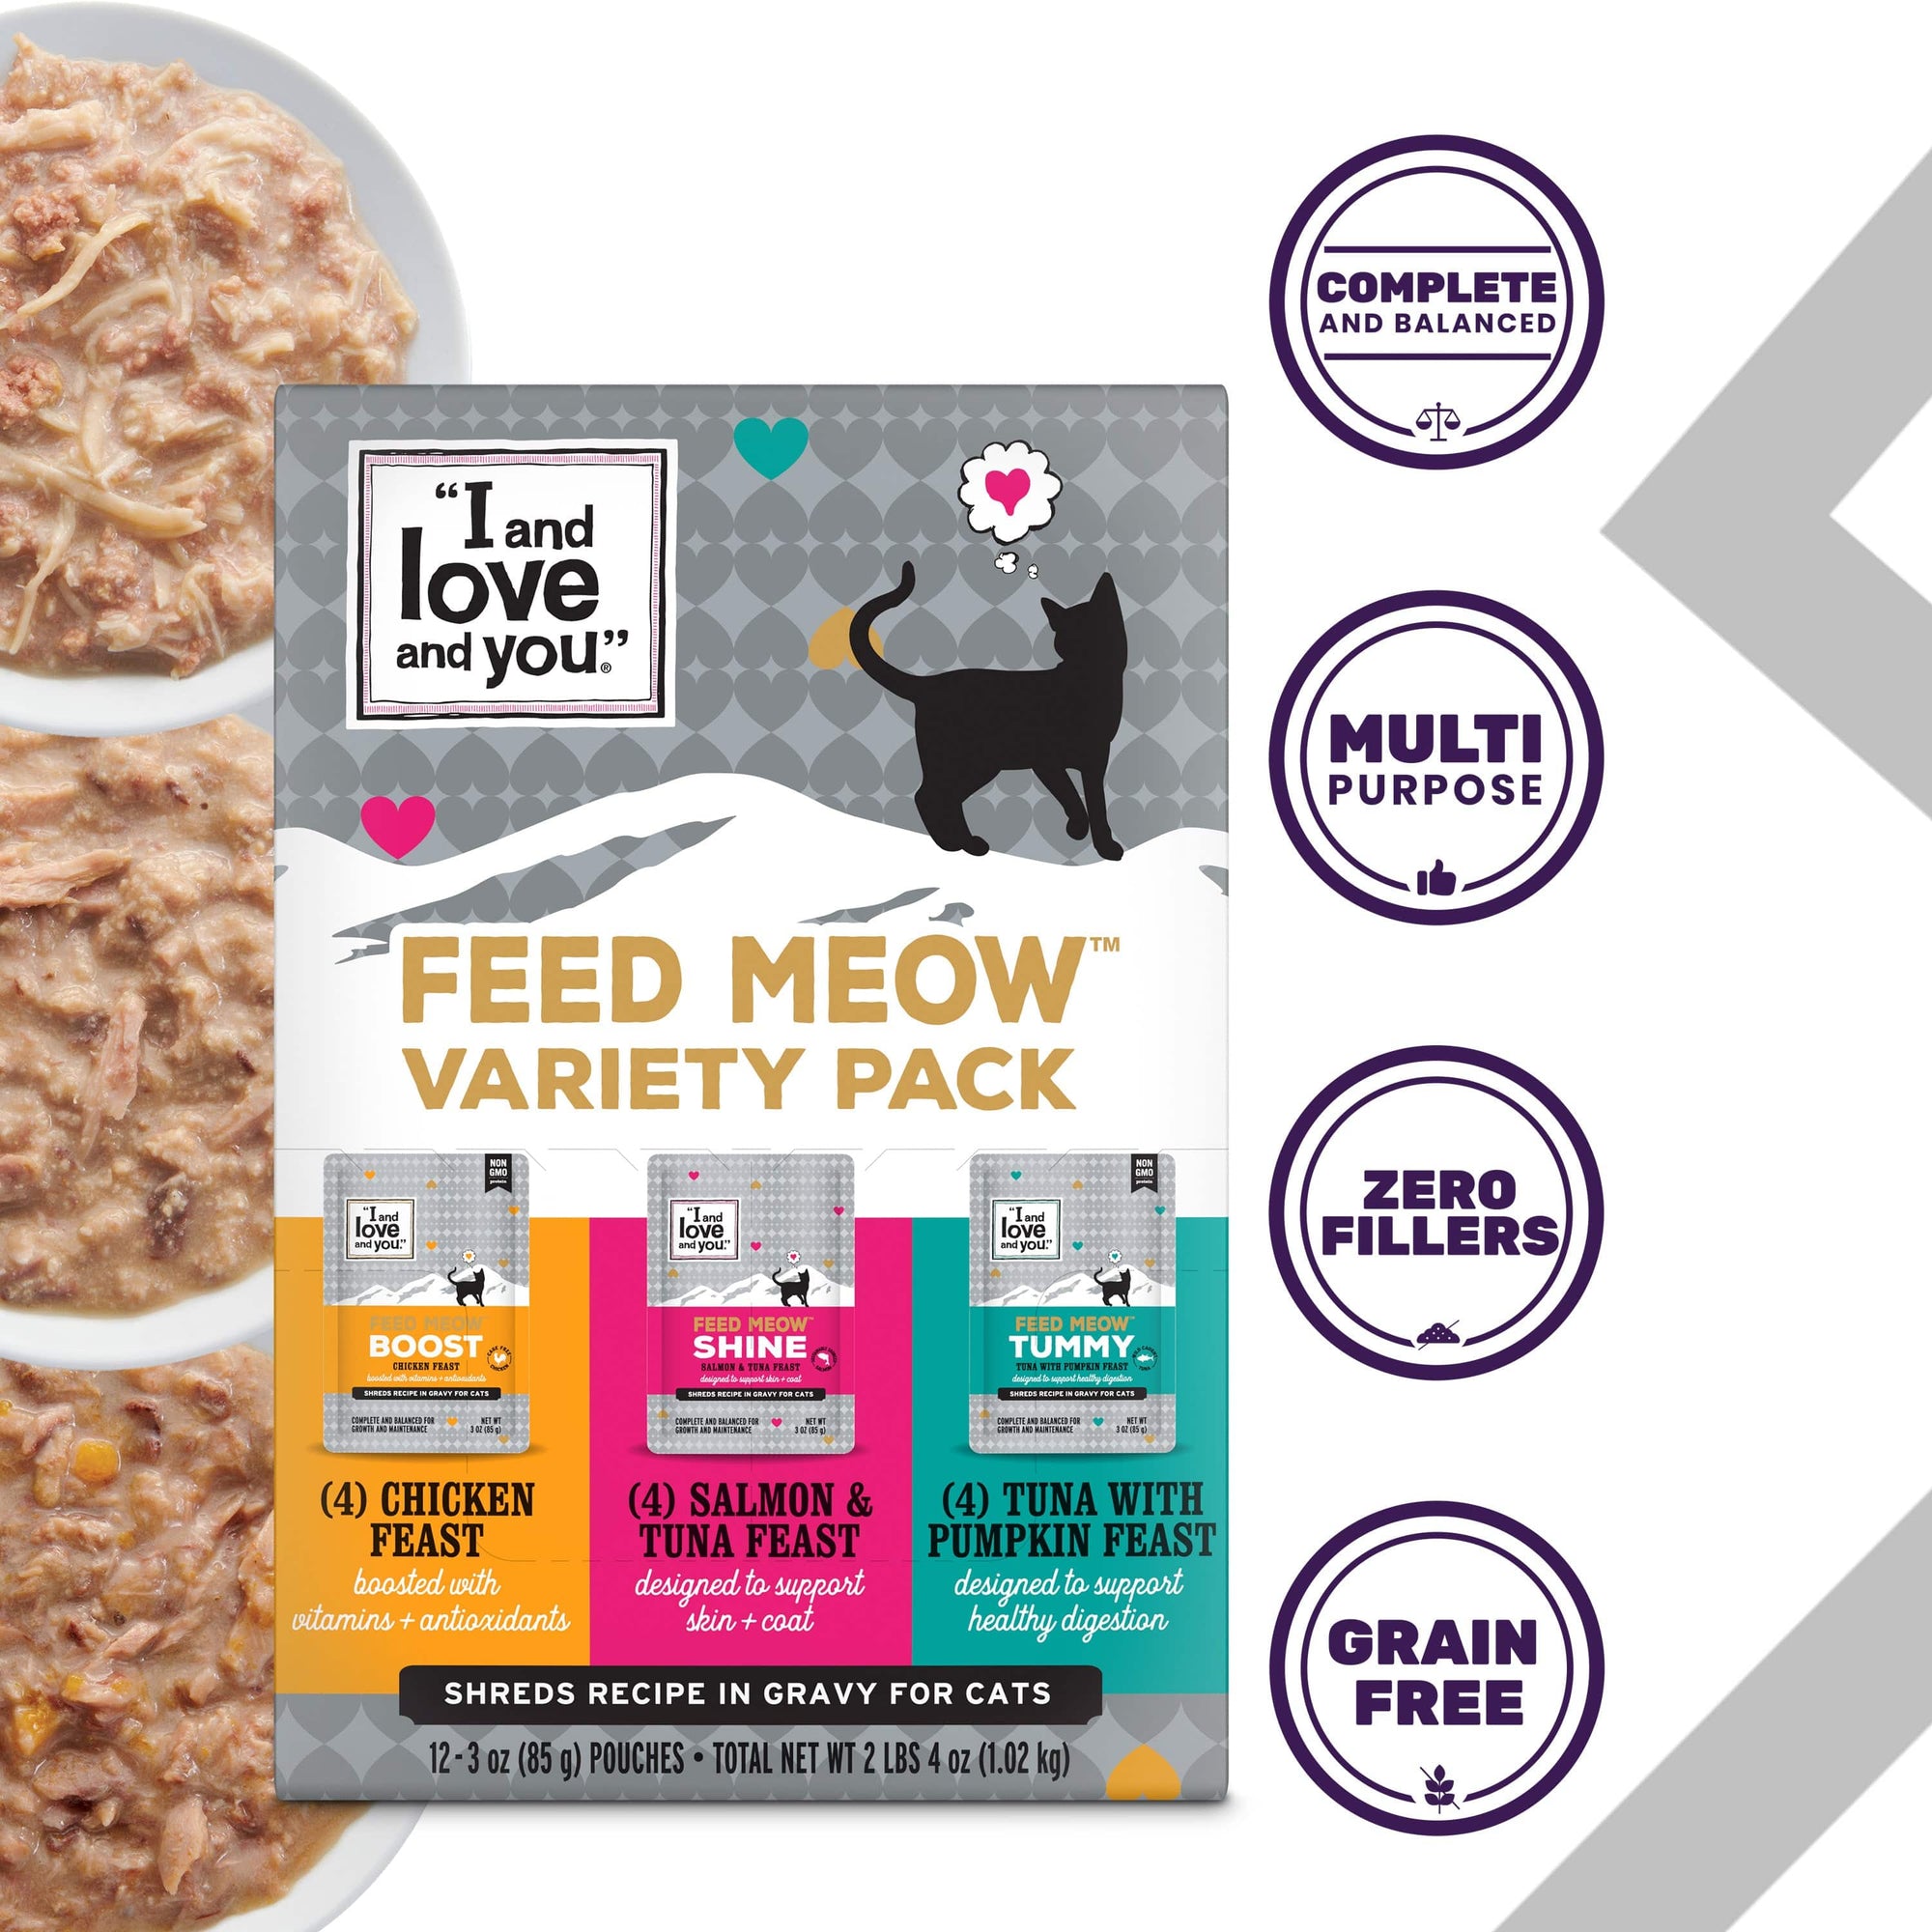 Feed Meow Variety Pack featuring BOOST Chicken, TUMMY Tuna with Pumpkin, and SHINE Salmon & Tuna pouches with gravy.